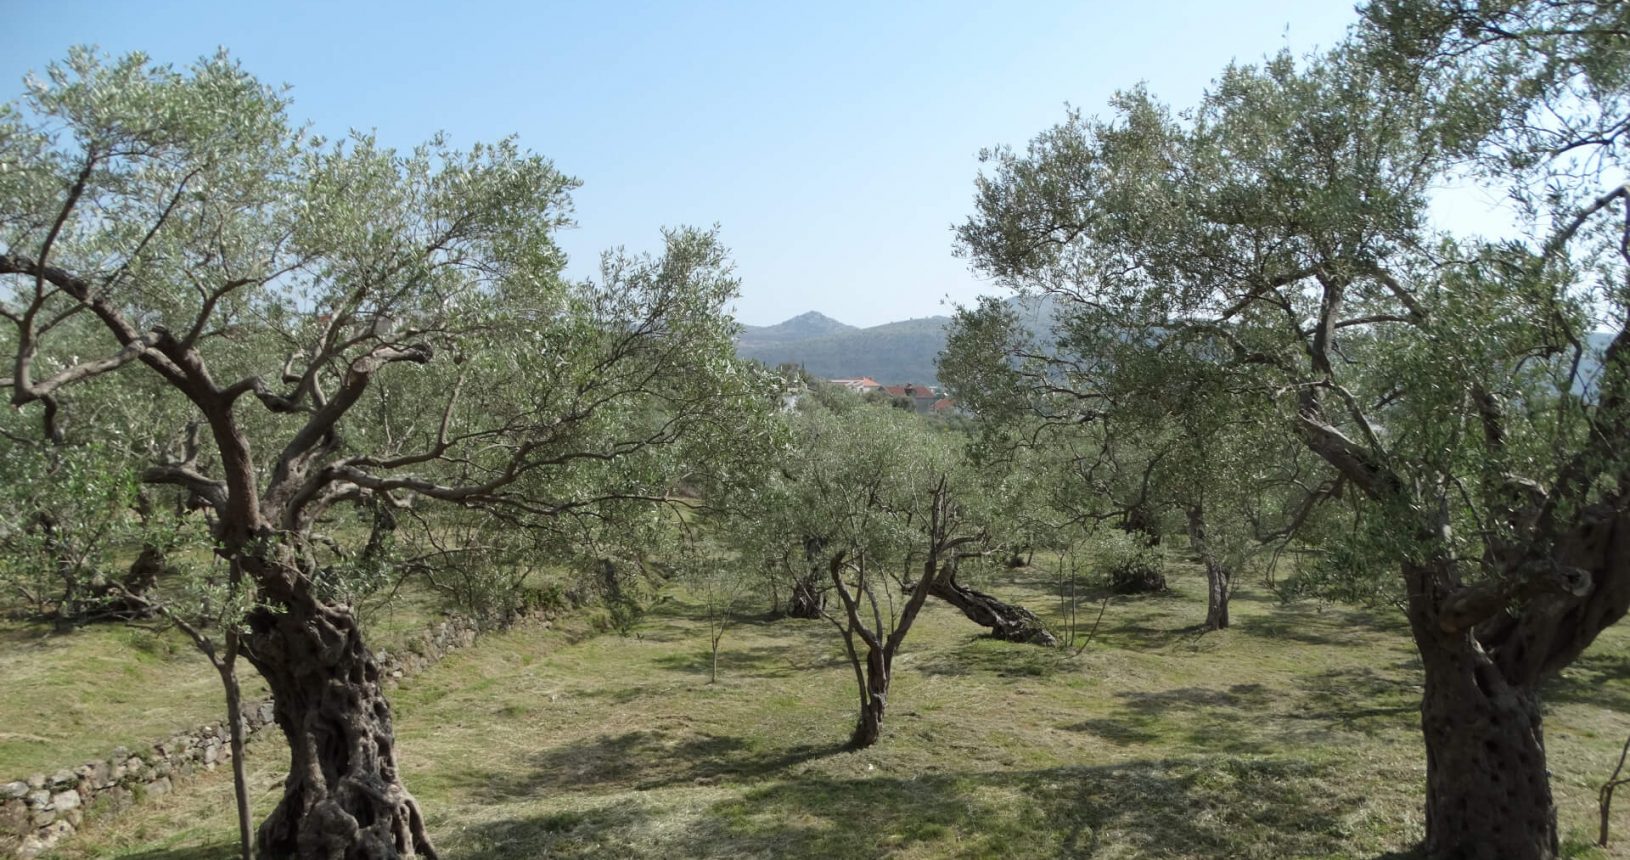 Olive plantation on the way to Old Bar